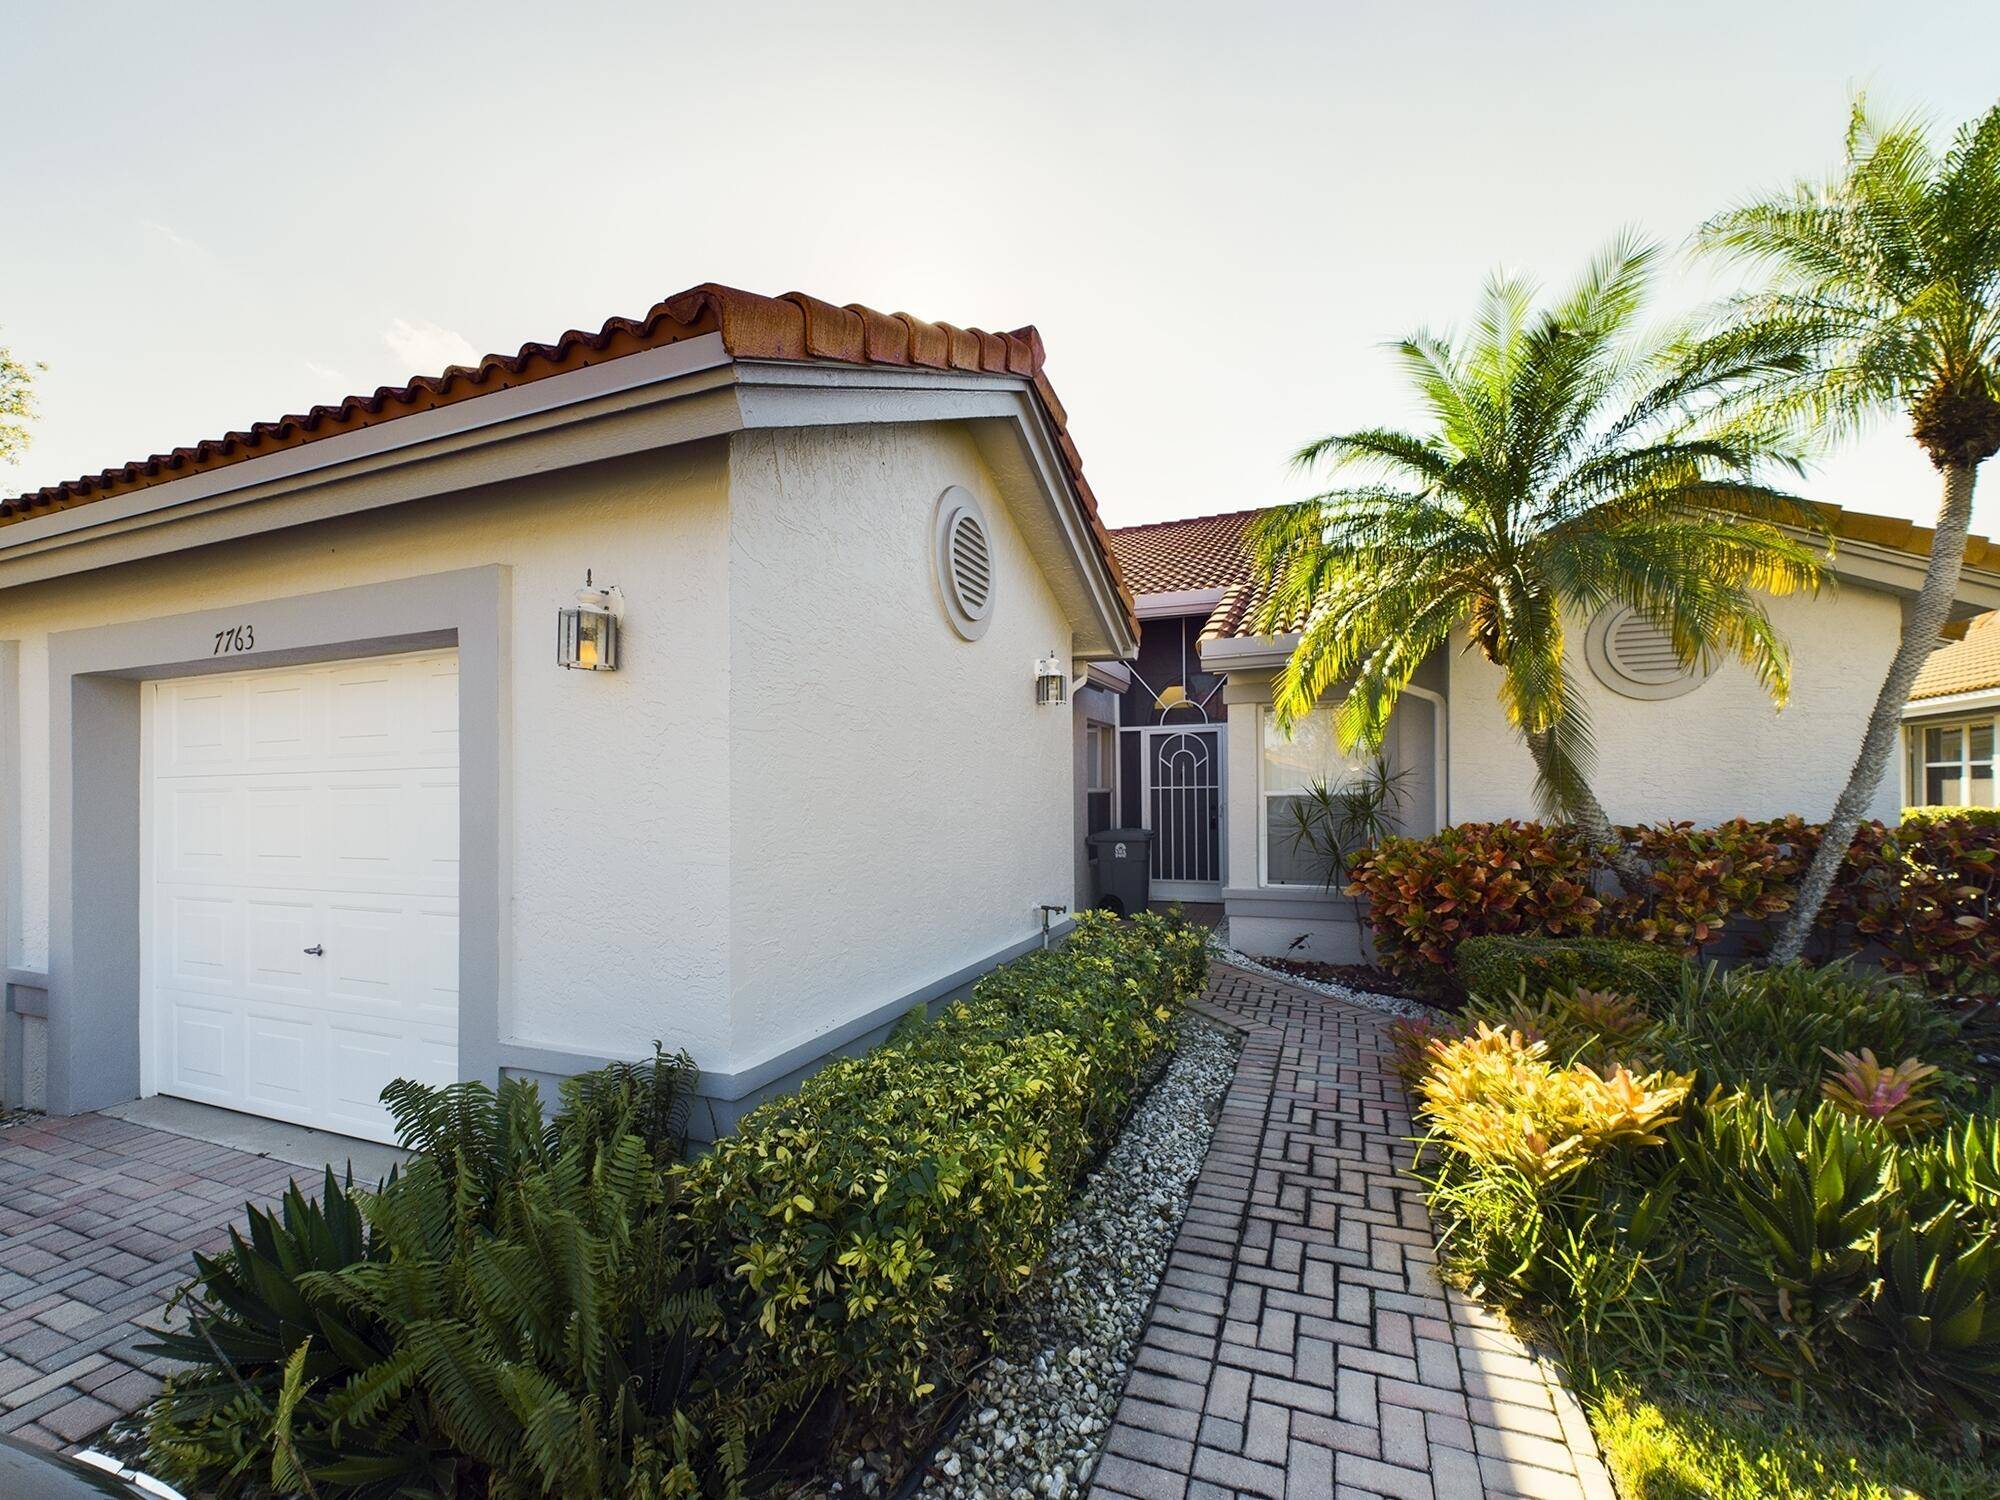 Enjoy every day in this idyllic lakeside villa located in the lovely Palm Isles gated community.